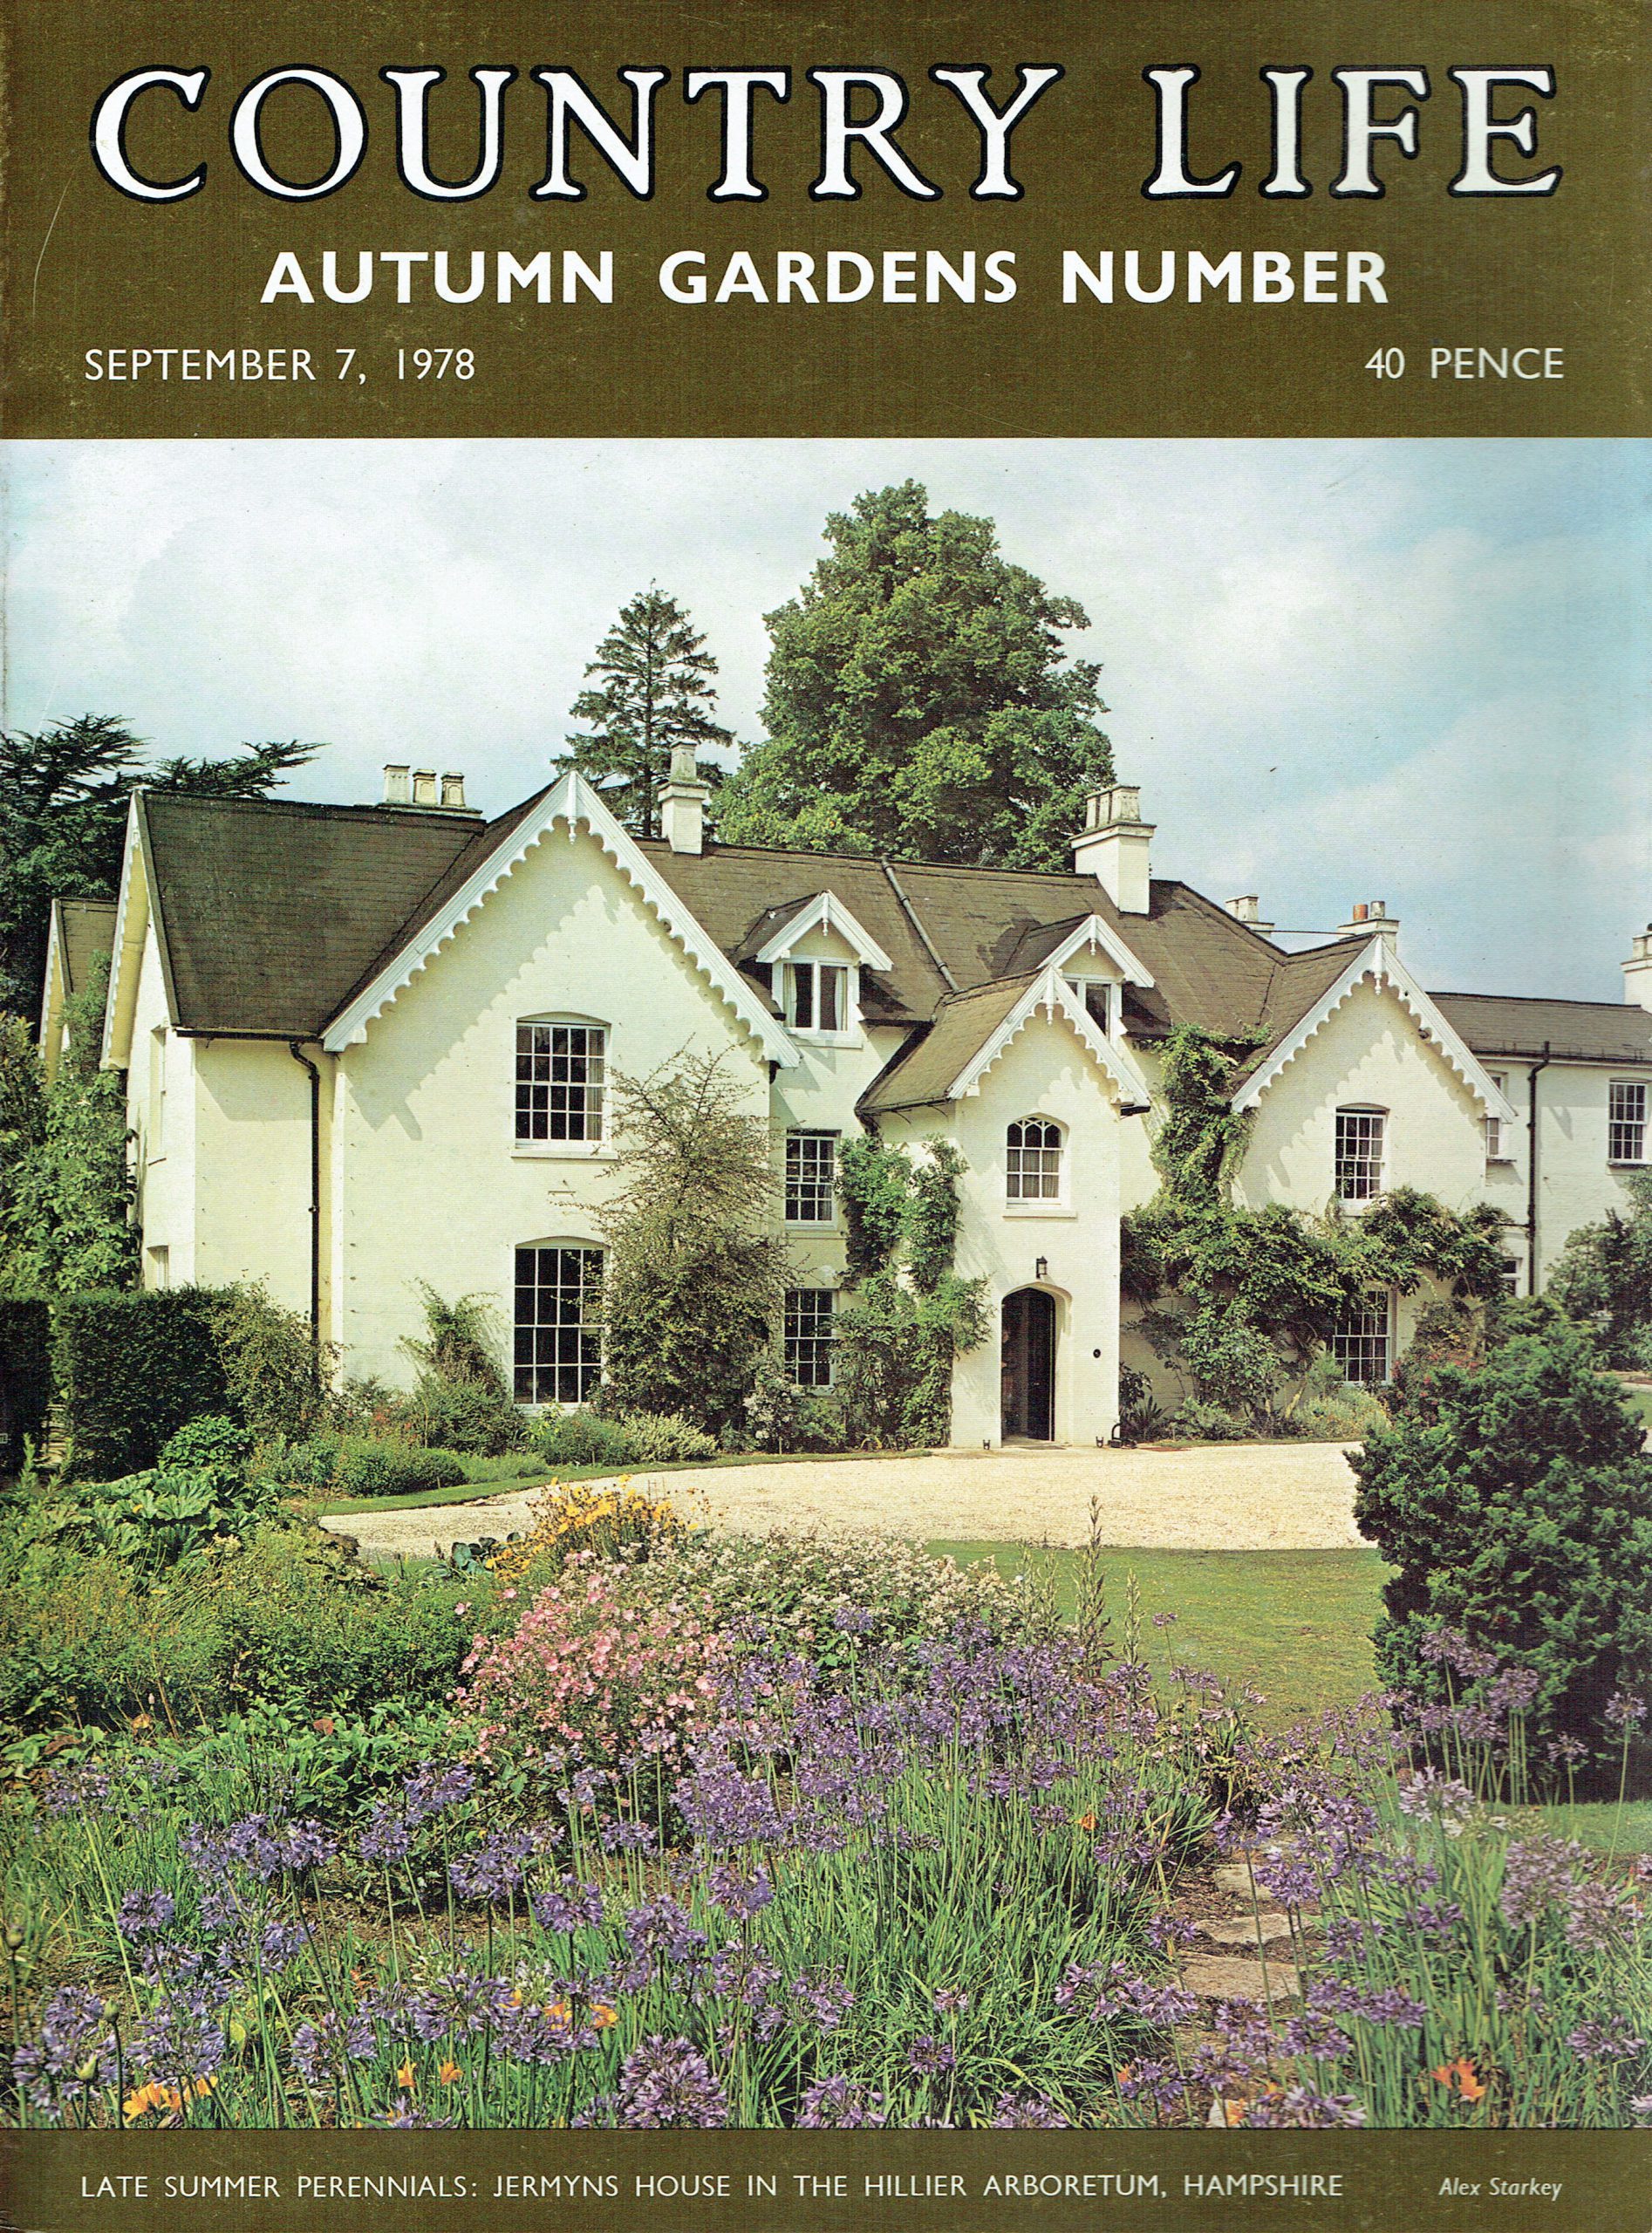 Country Life Magazine Archive 1897-2005